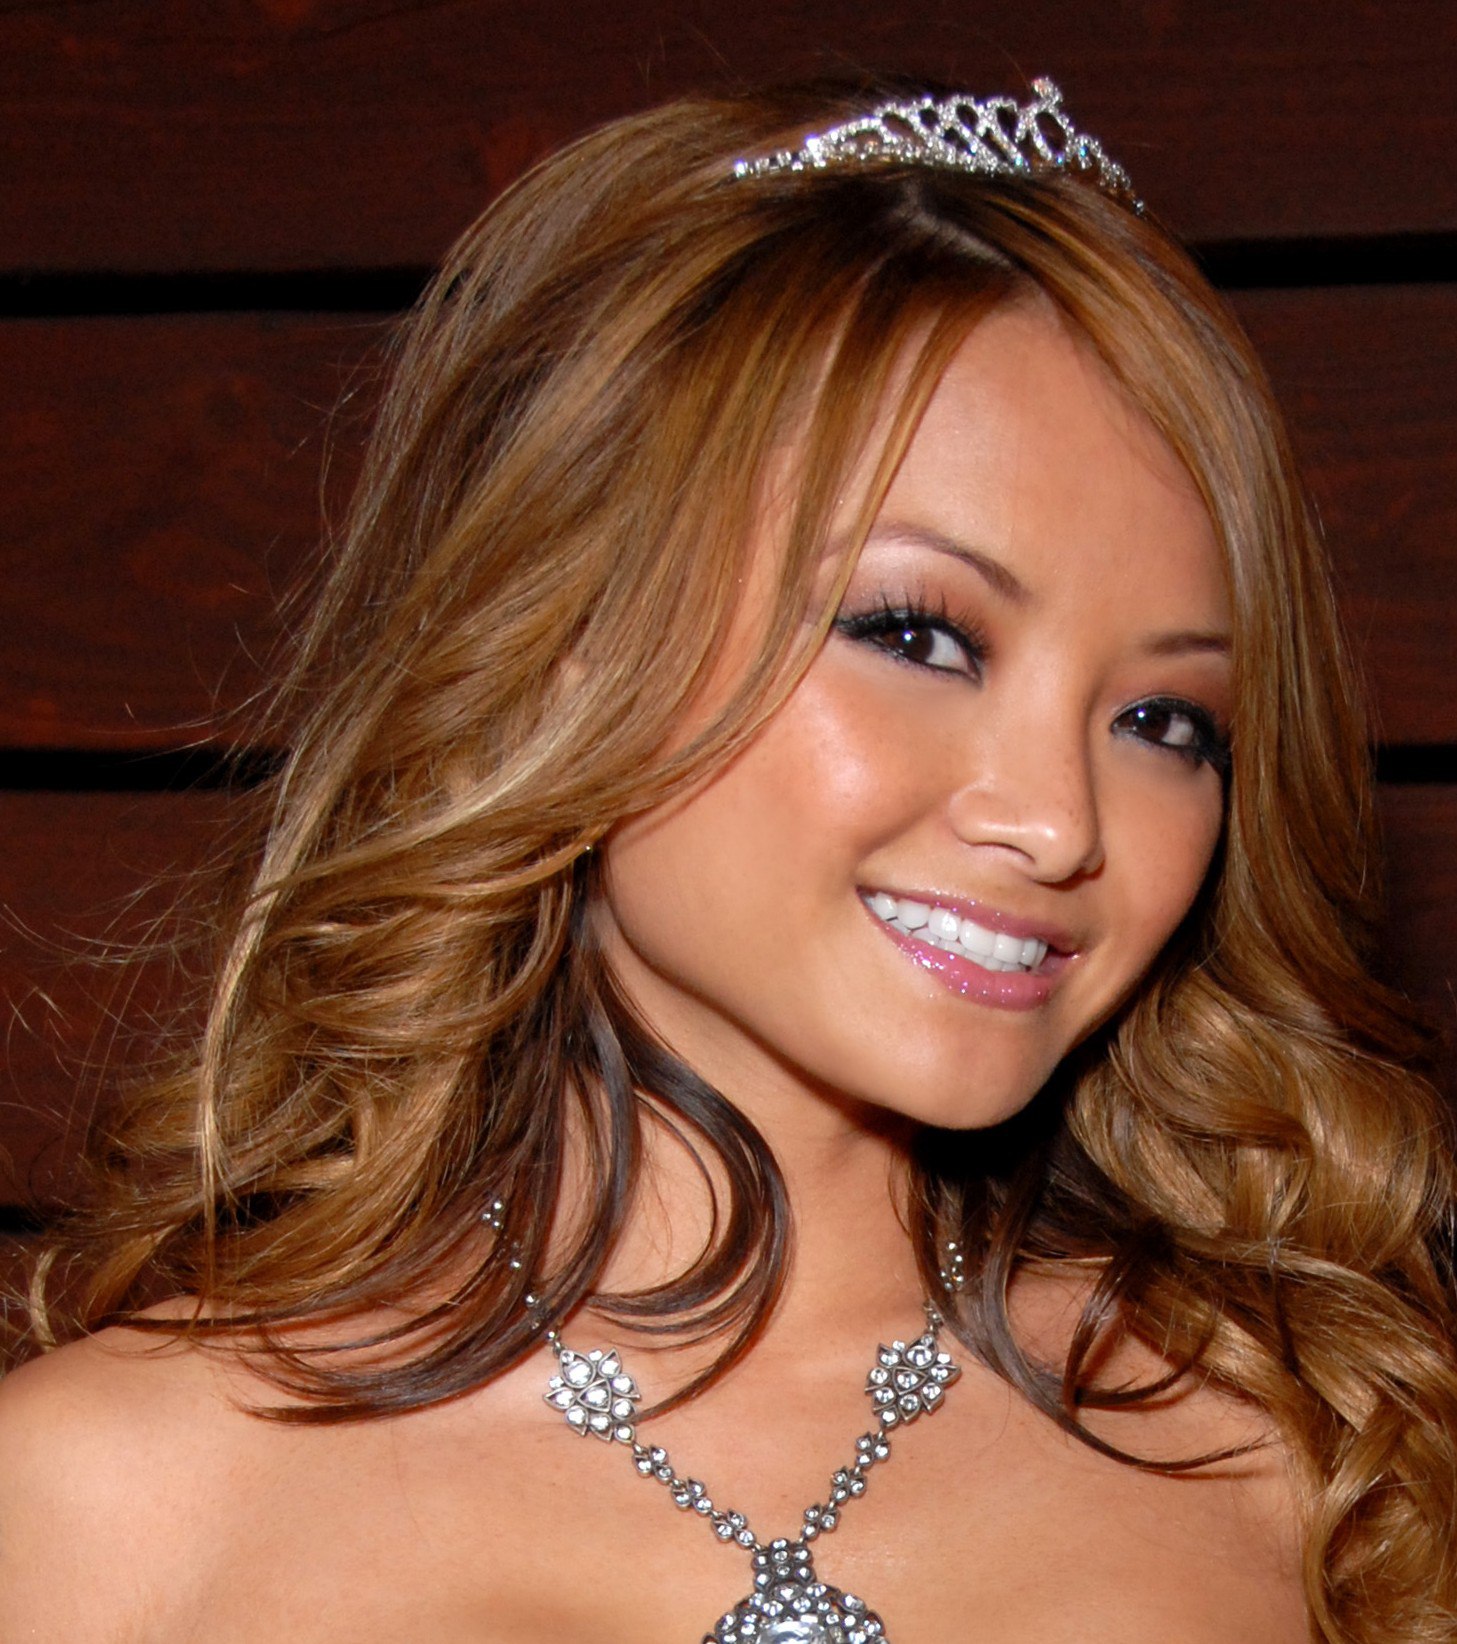 Tila Tequila Kicked off Of 'Celebrity Big Brother' for Hitler Rant ...